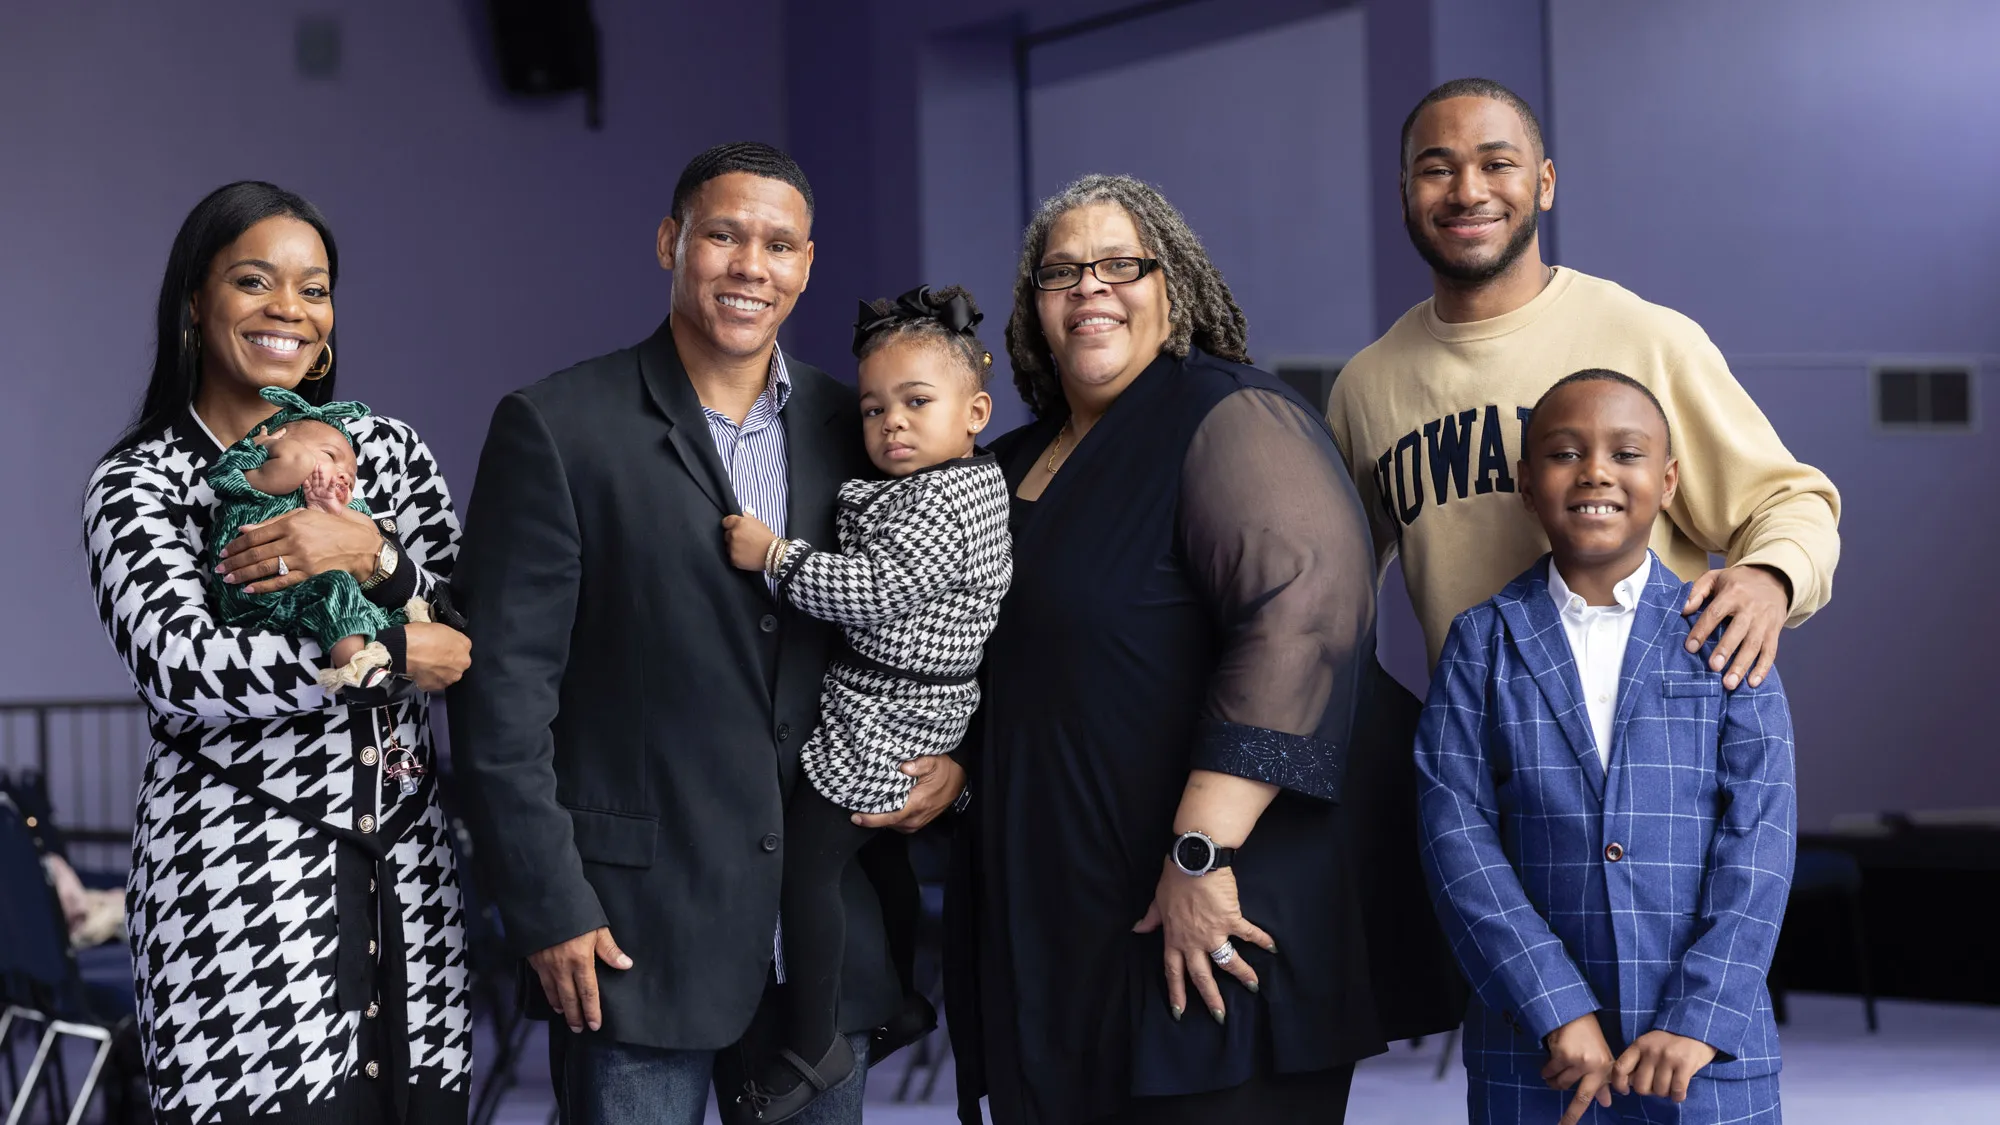 Patrice Palmer poses with one of her sons, Brandon Palmer, and his family. From left are his wife, a pretty woman with long hair wearing a black and white dress and holding a baby dressed in green; Brandon, who wears a sports coat and dark jeans and holds a young daughter wearing an outfit similar to her mom’s; Patrice, in a pretty top with see-through sleeves; Brandon’s oldest son, a two-time Howard graduate wearing a sweatshirt from his alma mater; and Brandon’s youngest son, who wears a snazzy blue check